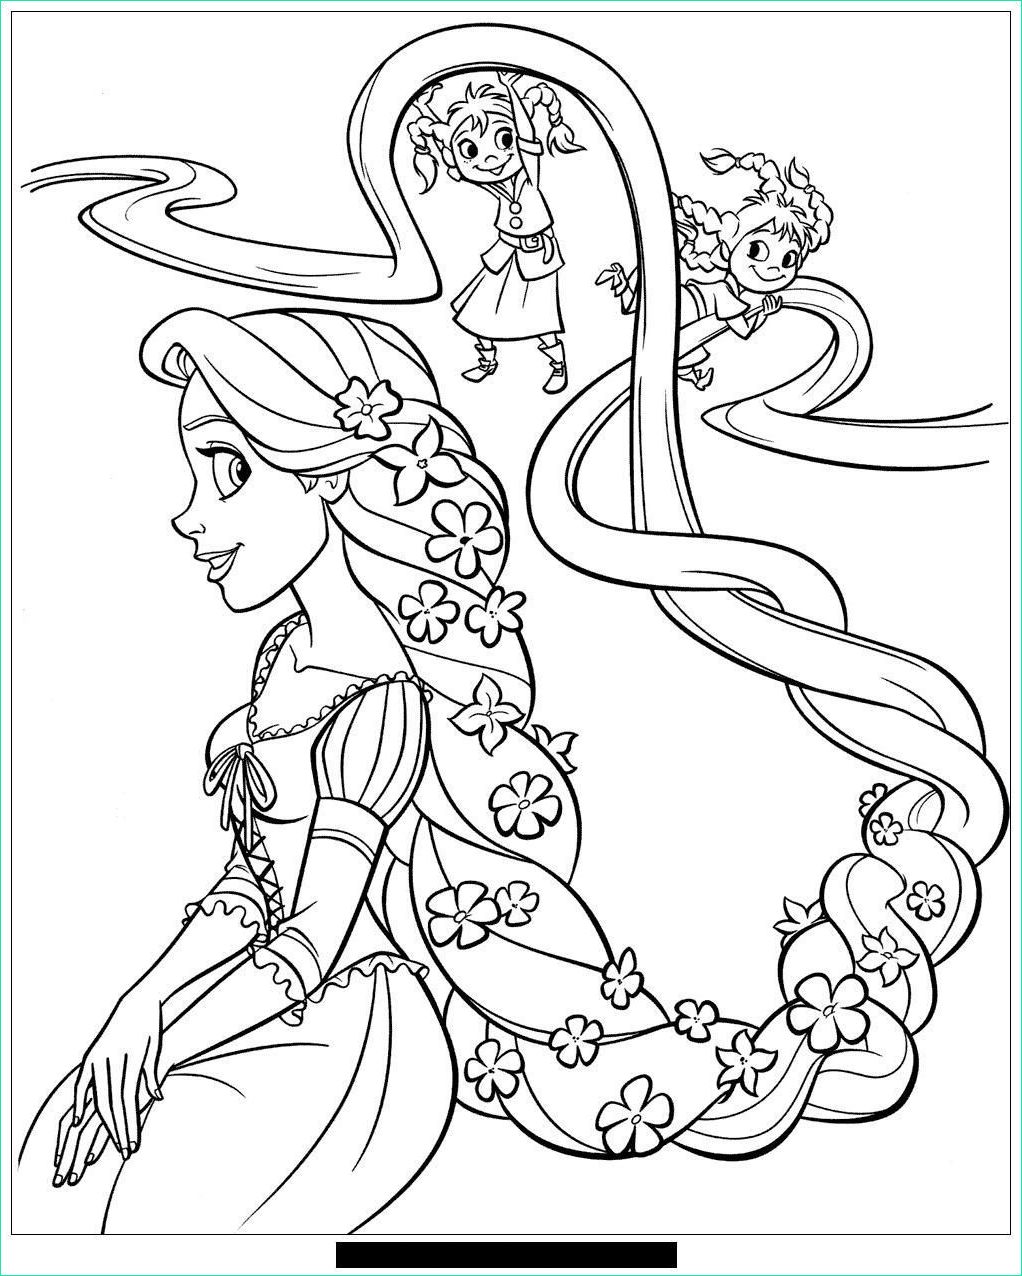 Coloriage Fille Princesse Luxe Images Coloriage Pour Fille à Imprimer Princesse – Coloriage Imprimer